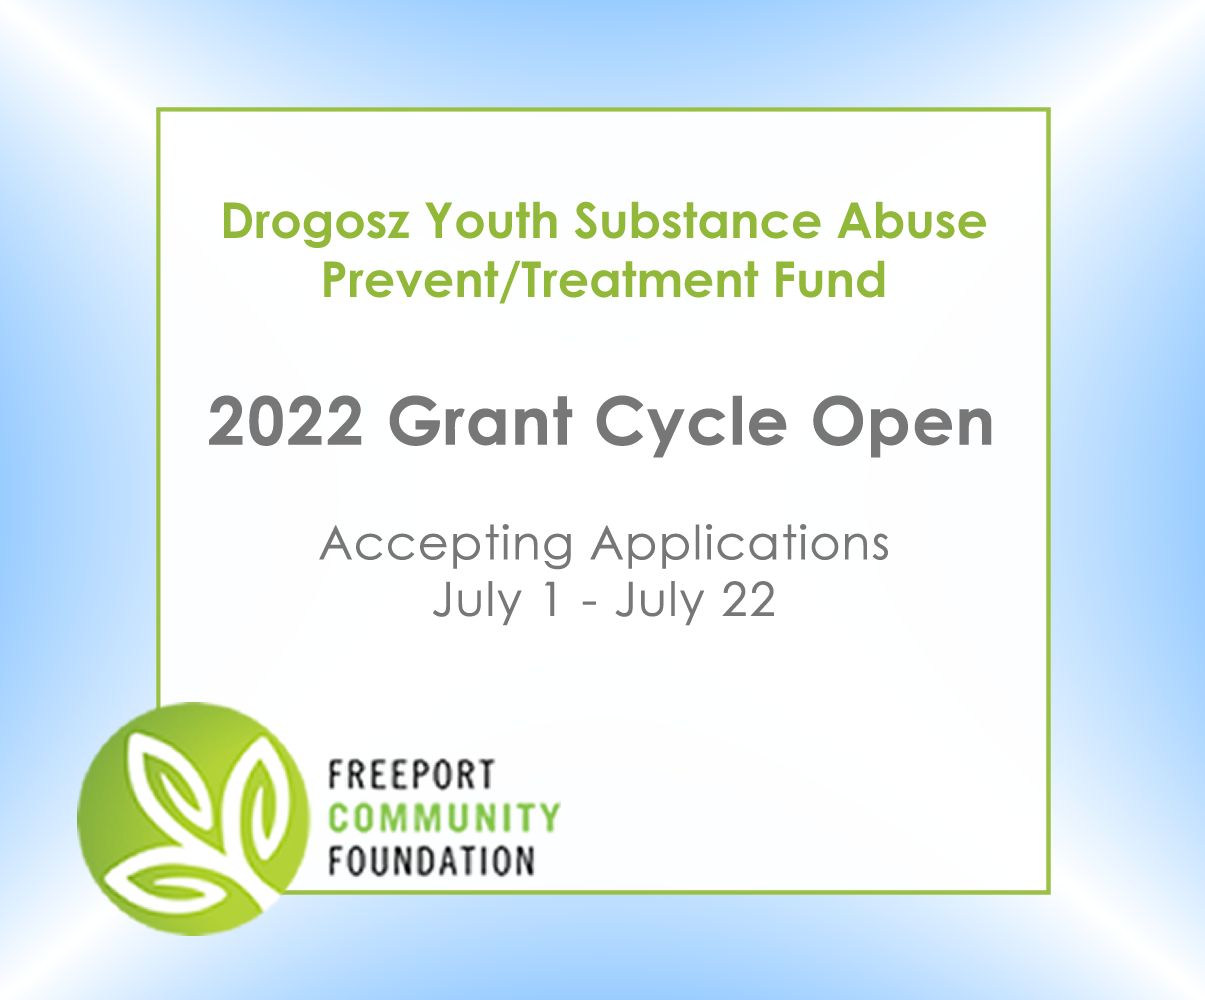 Drogosz Youth Substance Abuse Prevention/Treatment Fund Grant Cycle Open